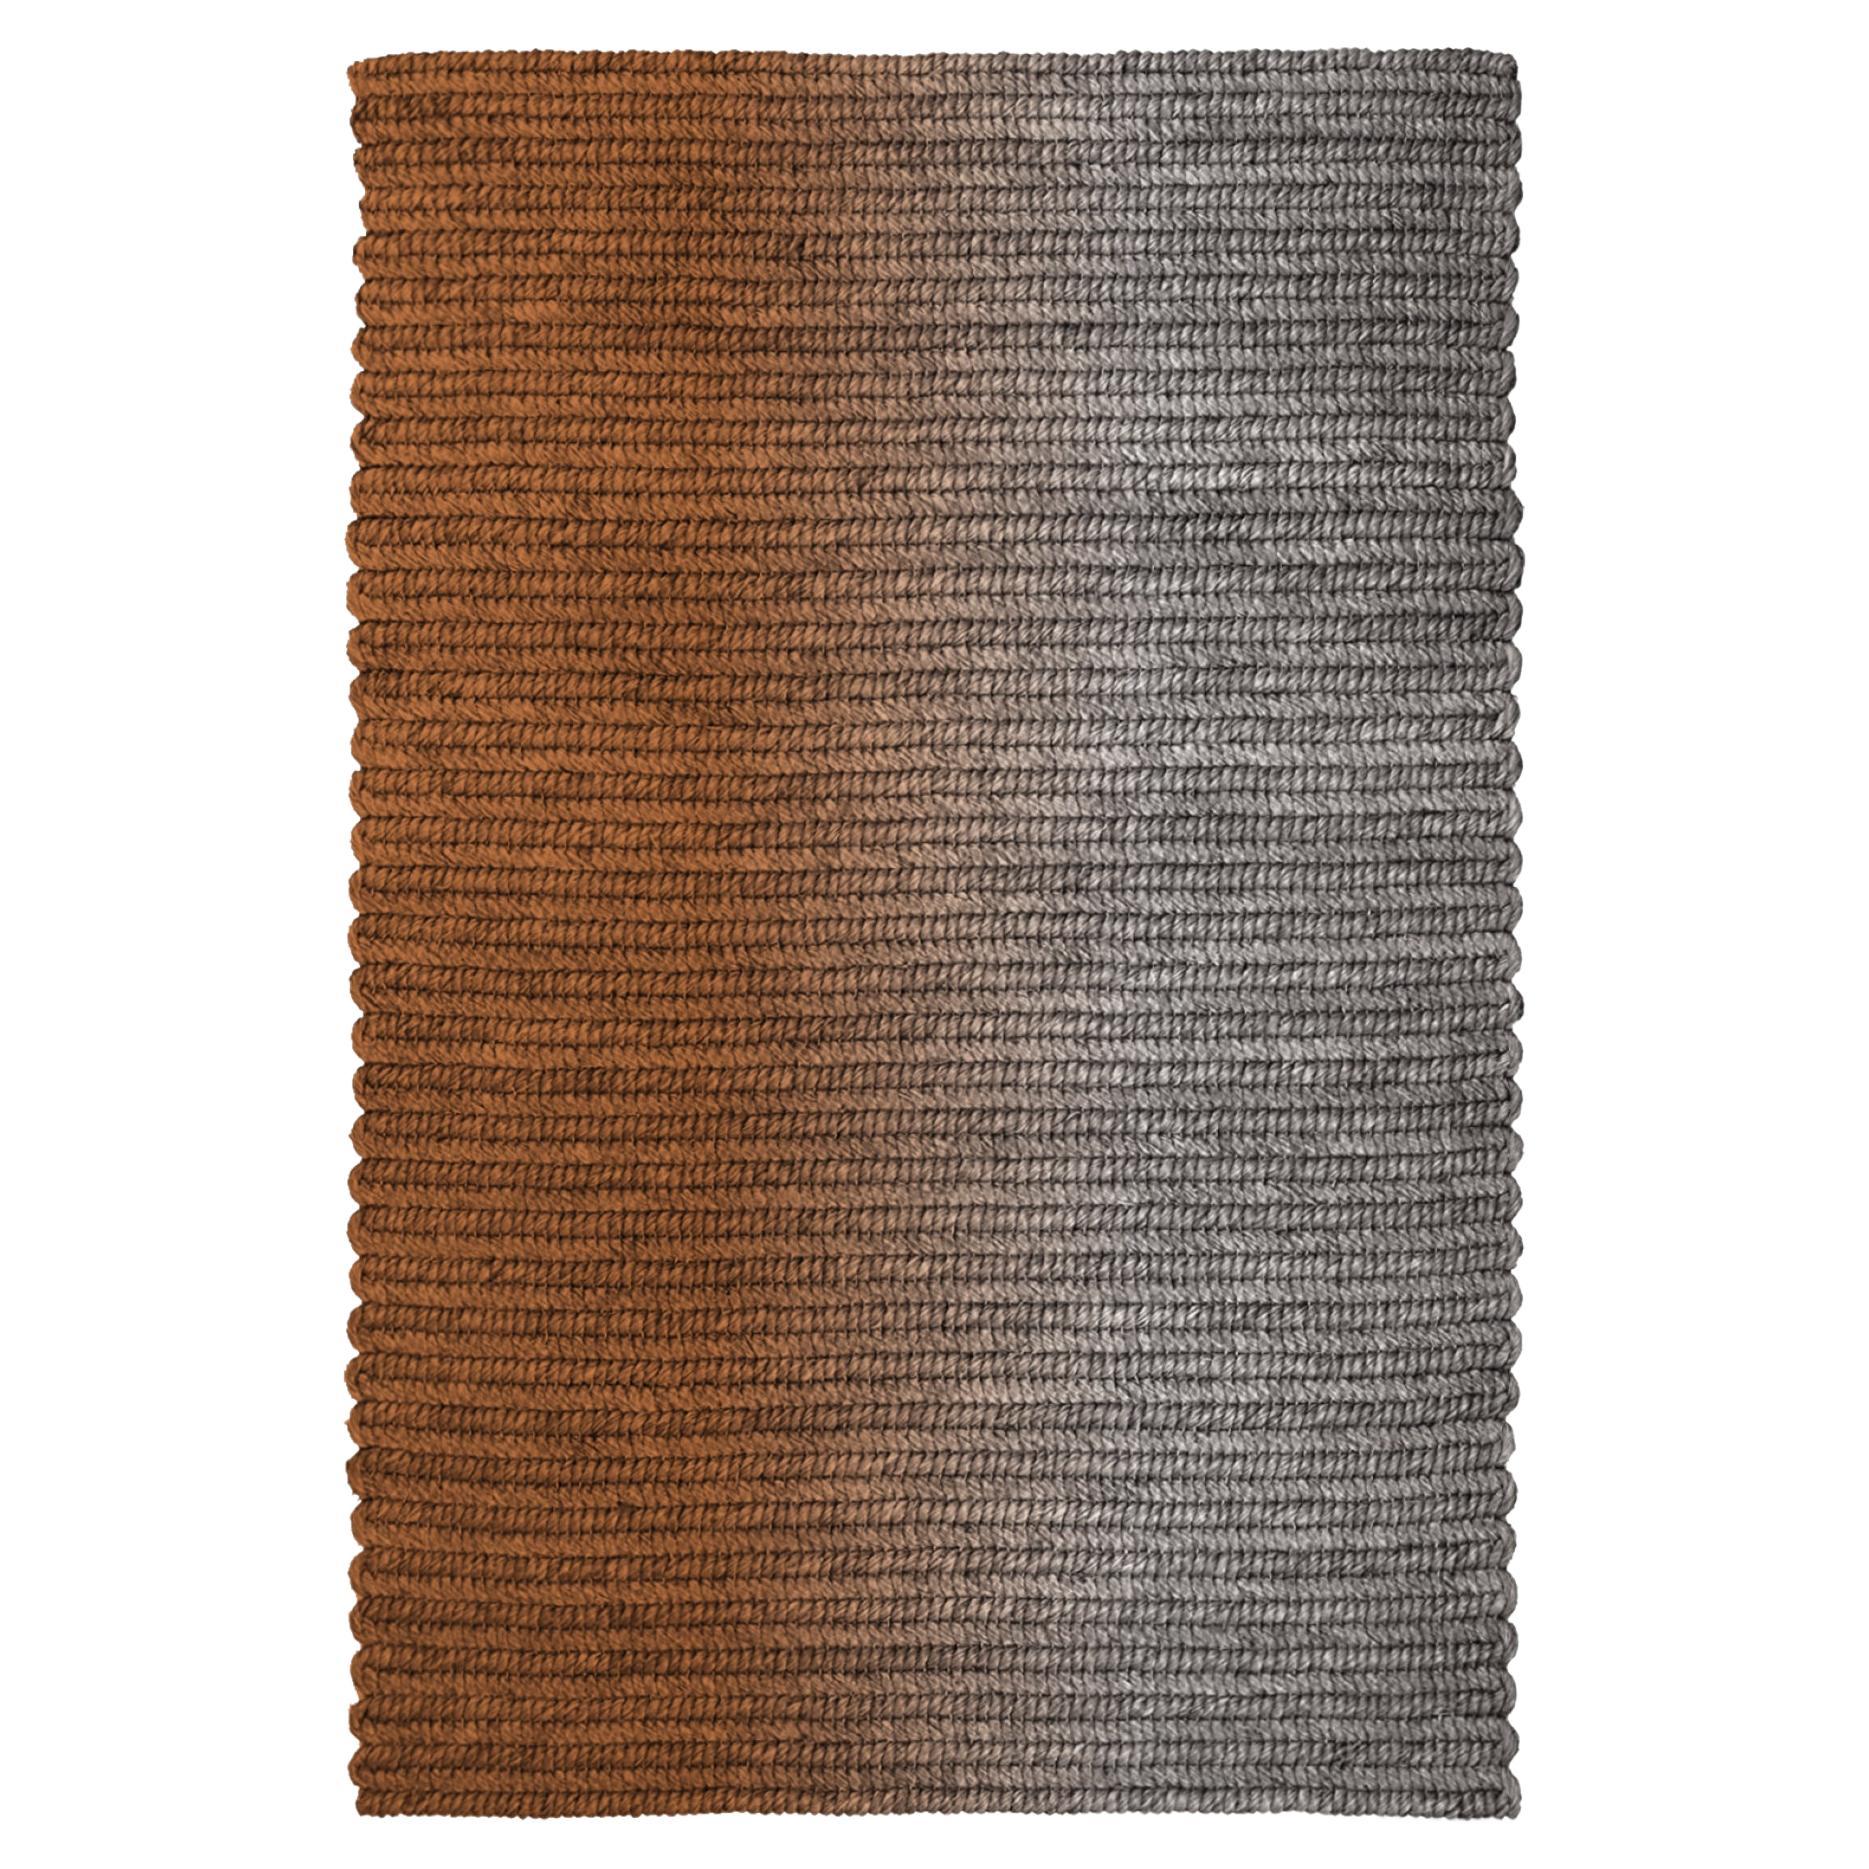 Claire Vos for Musett 'Switch' Abaca Indoor Rug in Mahogany, in 160 x 240 cm